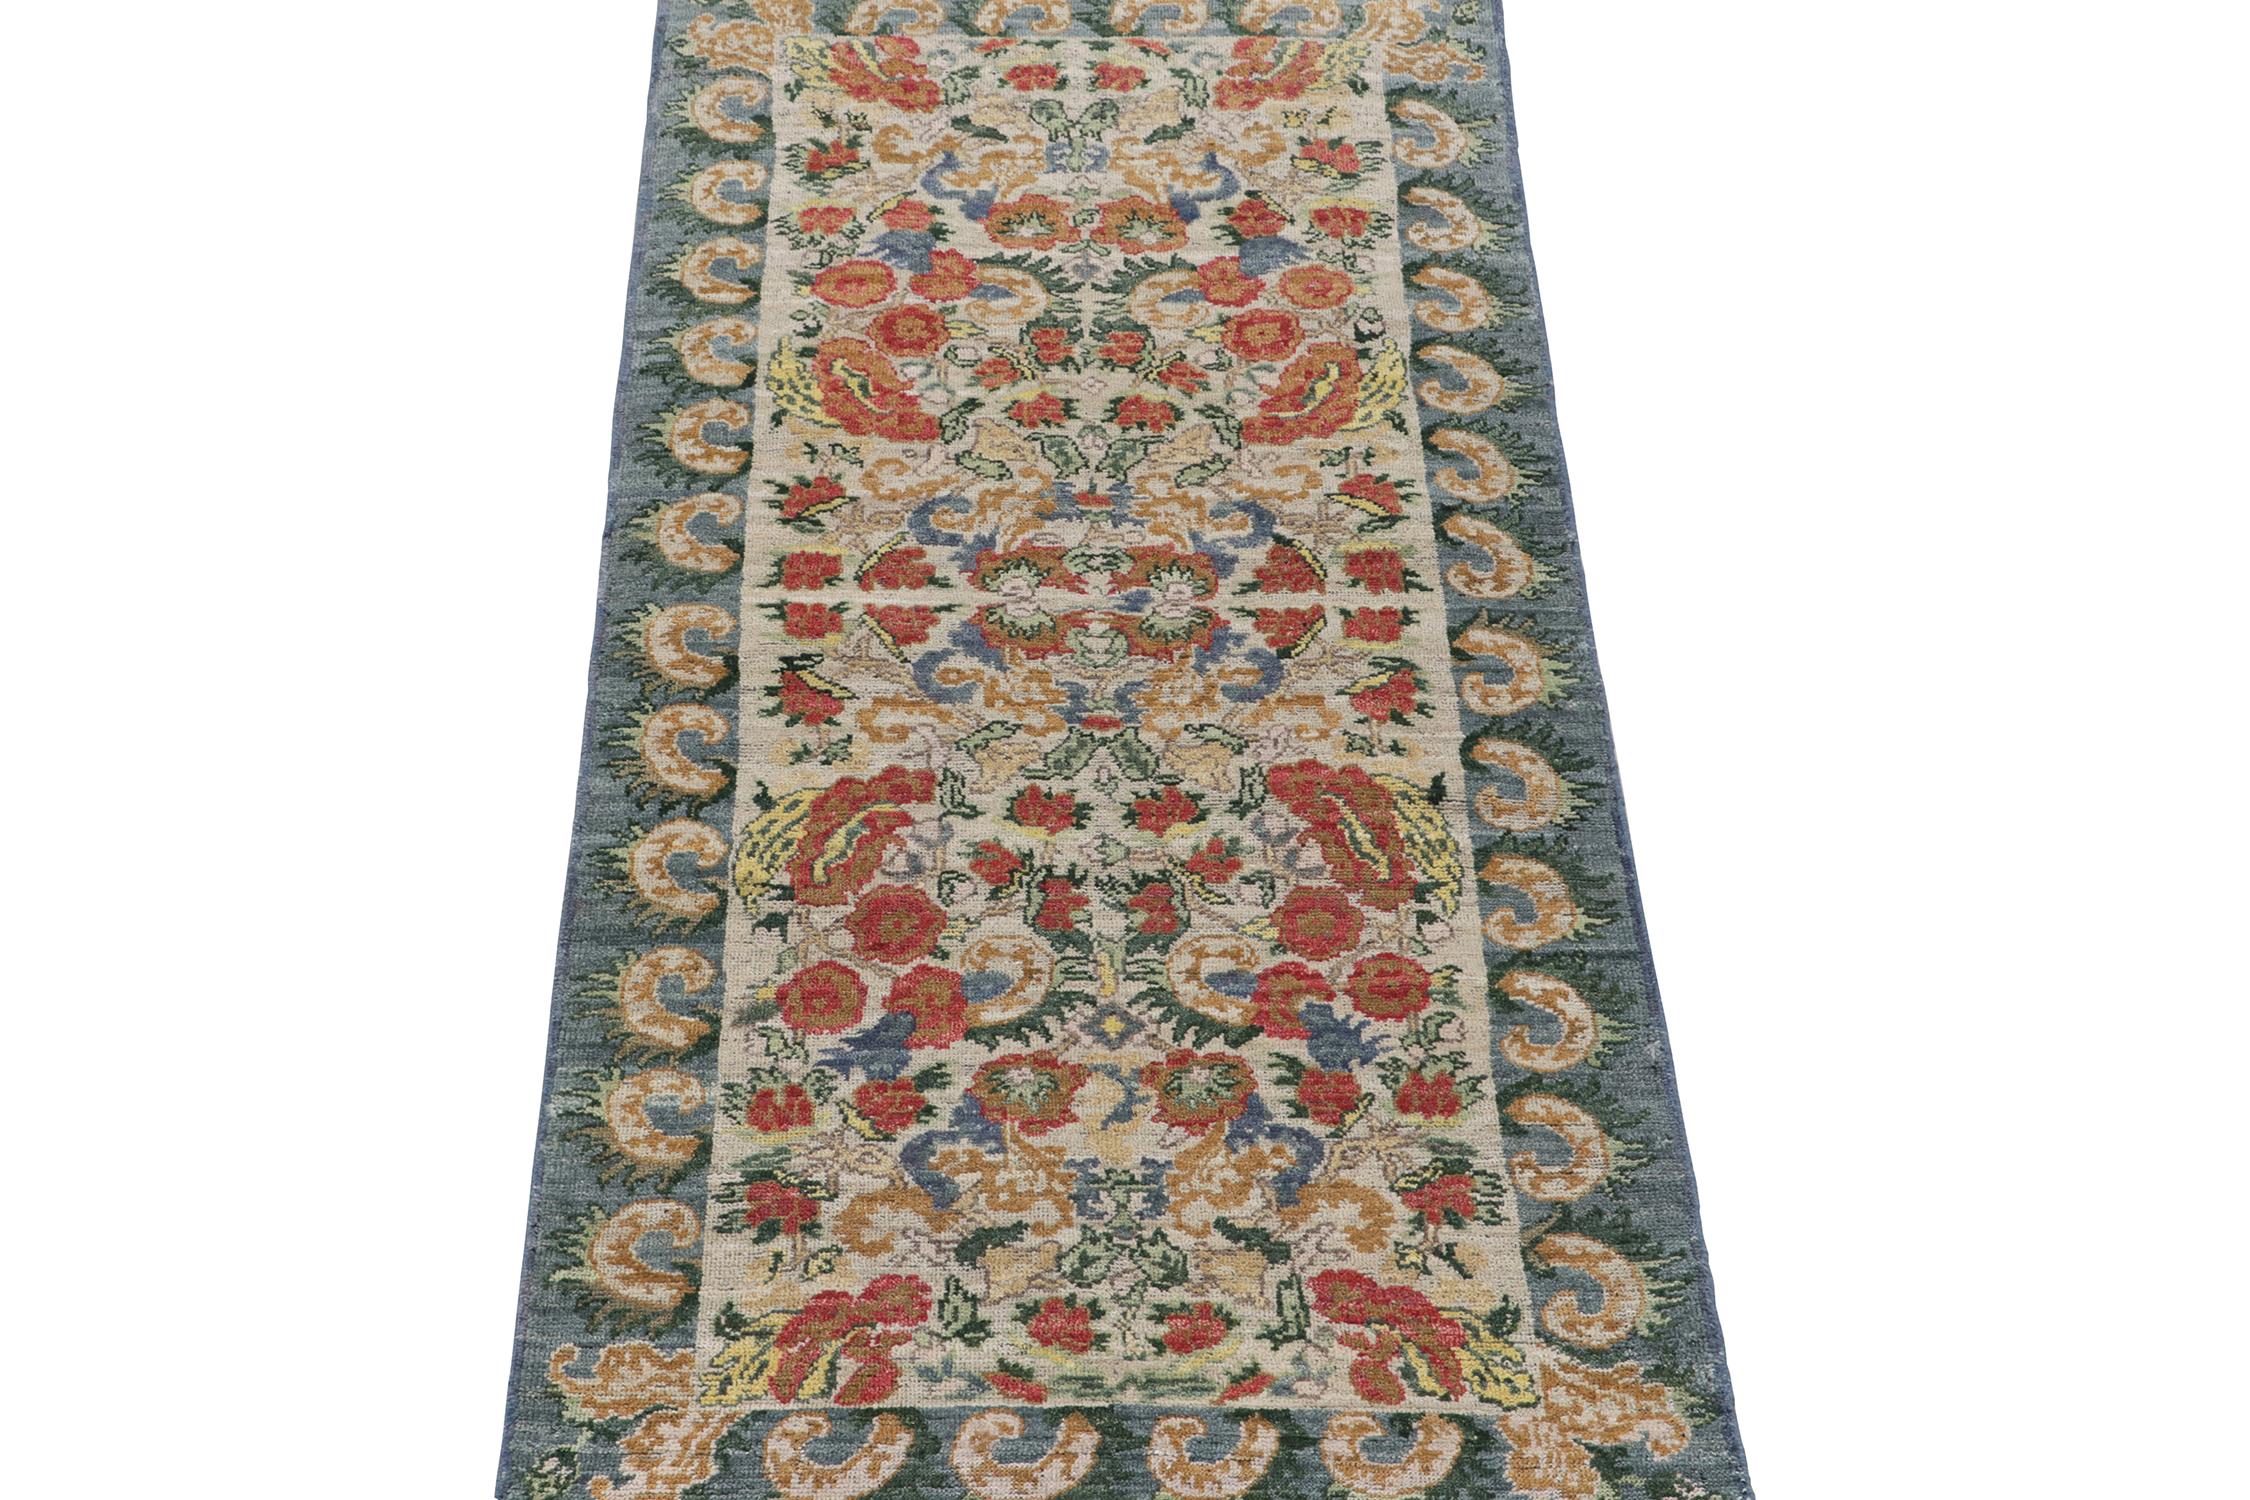 Tribal Rug & Kilim’s Classic Style Runner in Red Floral Patterns on Off-White For Sale